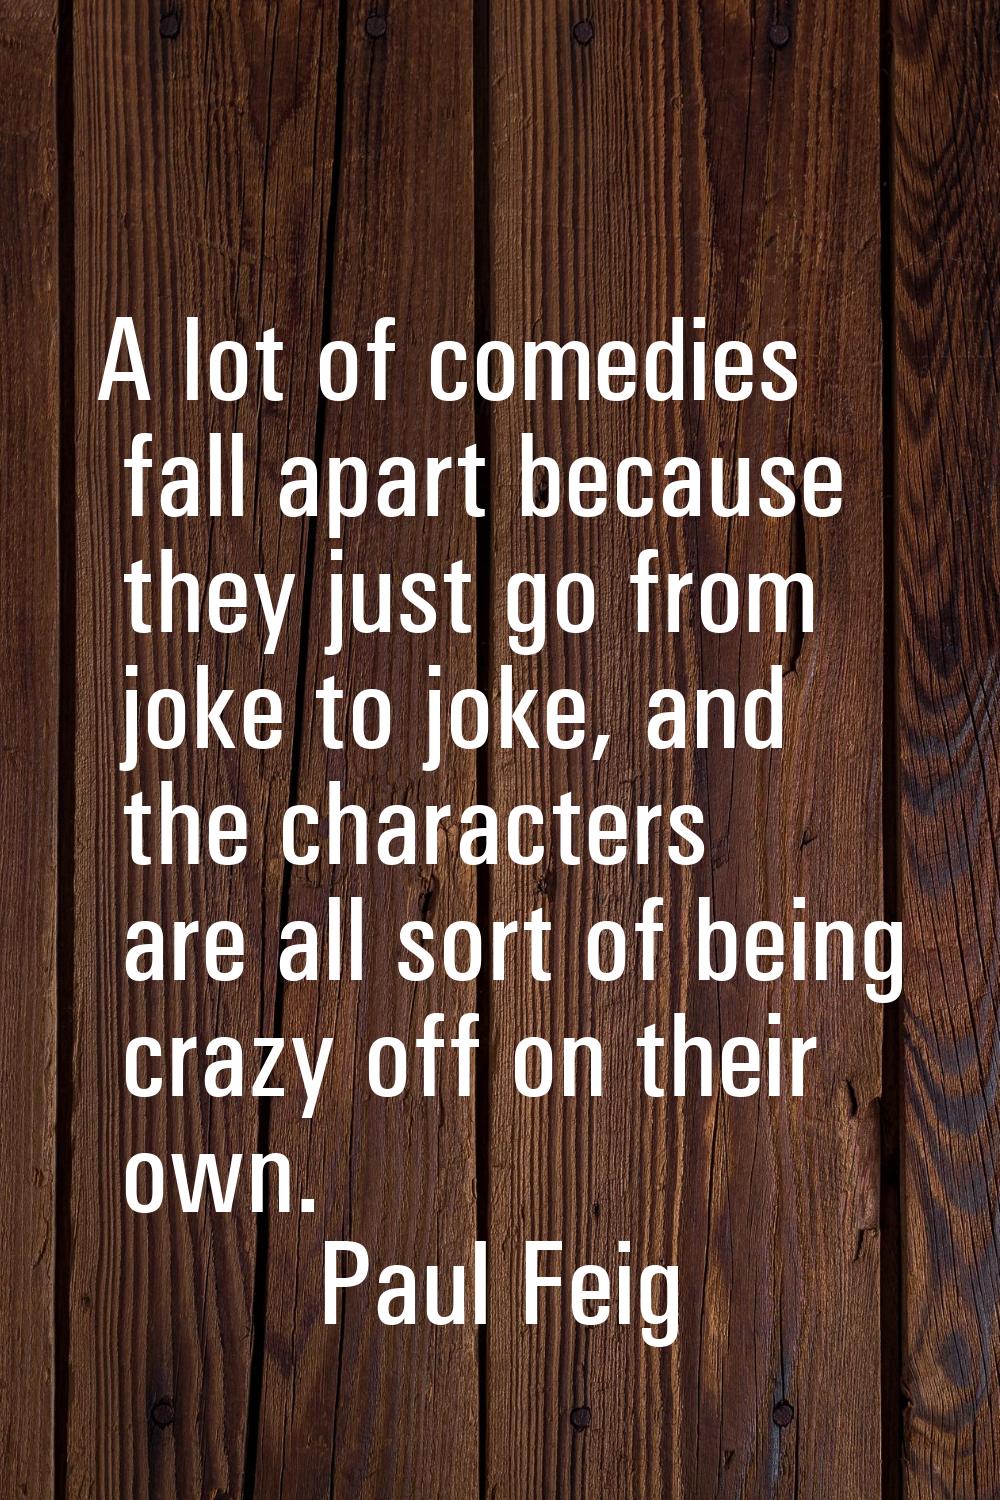 A lot of comedies fall apart because they just go from joke to joke, and the characters are all sor